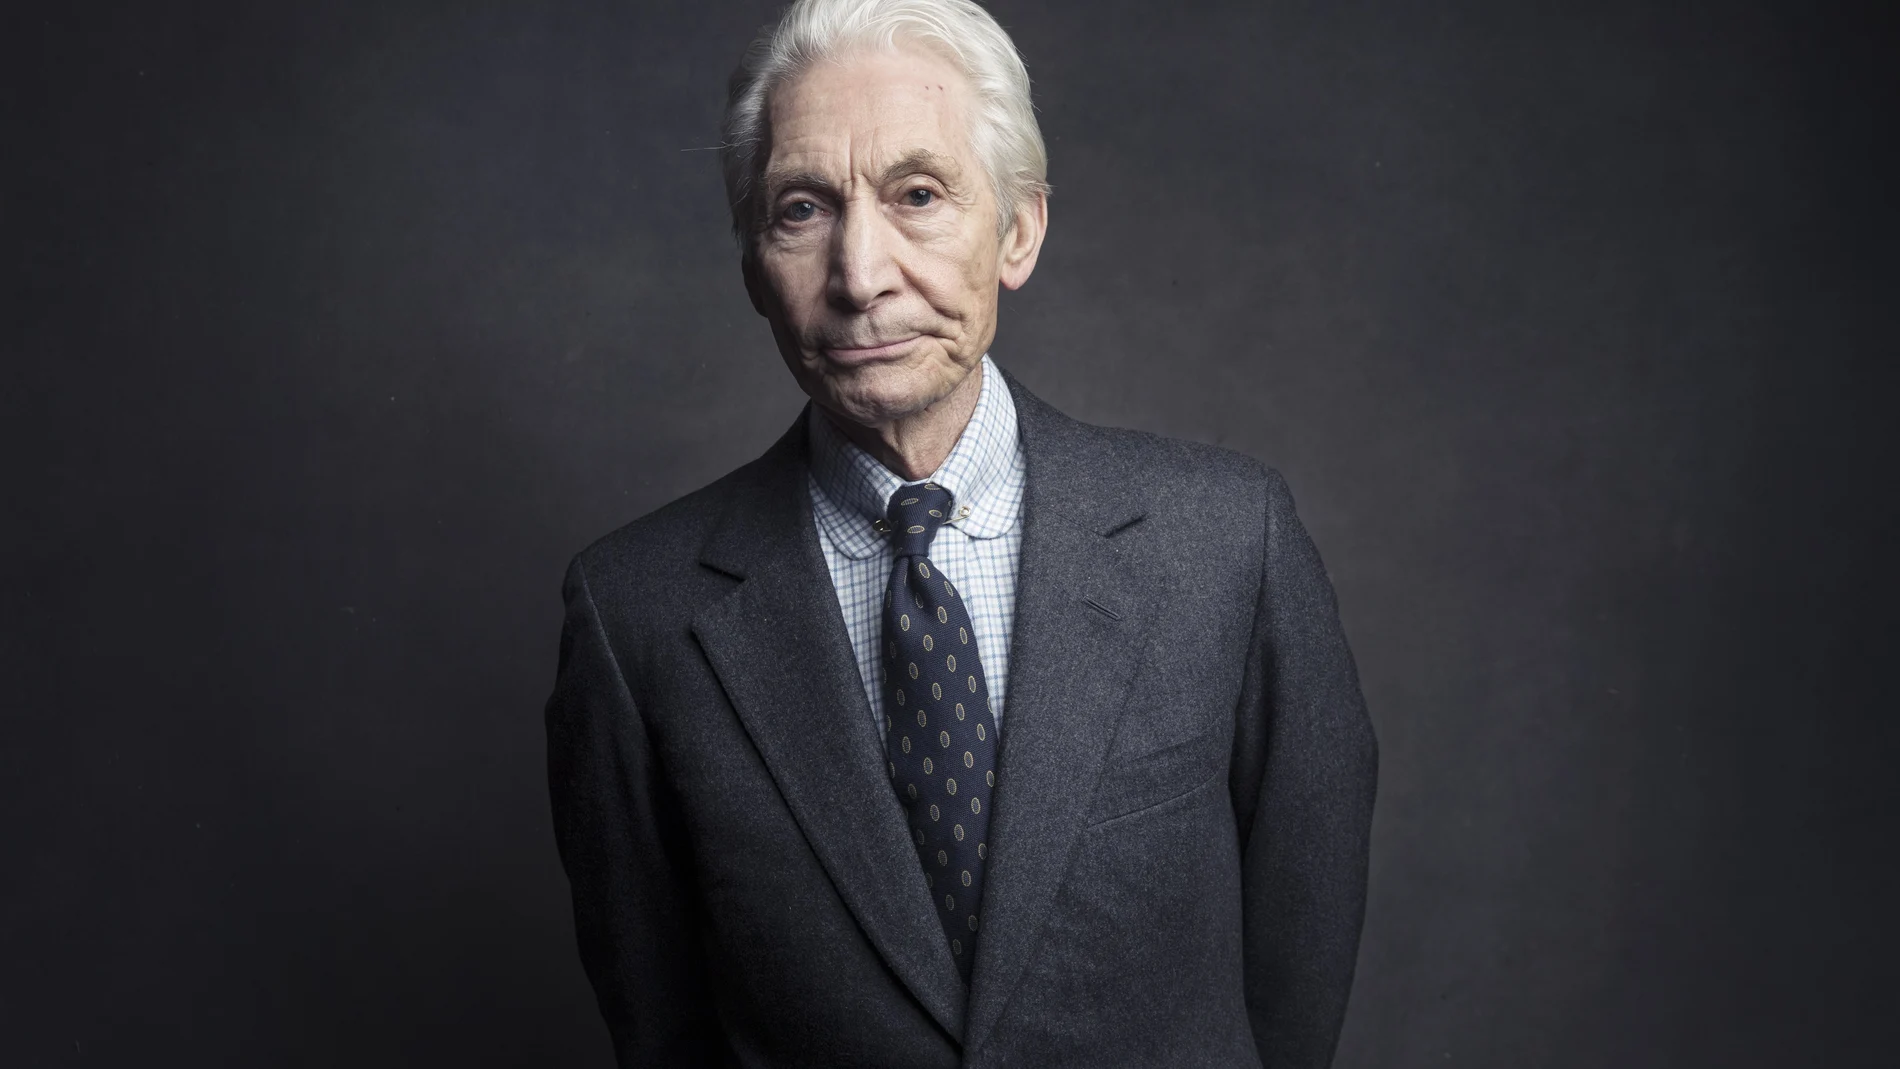 FILE - Charlie Watts of the Rolling Stones poses for a portrait on Nov. 14, 2016, in New York. Watts' publicist, Bernard Doherty, said Watts passed away peacefully in a London hospital surrounded by his family on Tuesday, Aug. 24, 2021. He was 80. (Photo by Victoria Will/Invision/AP, File)